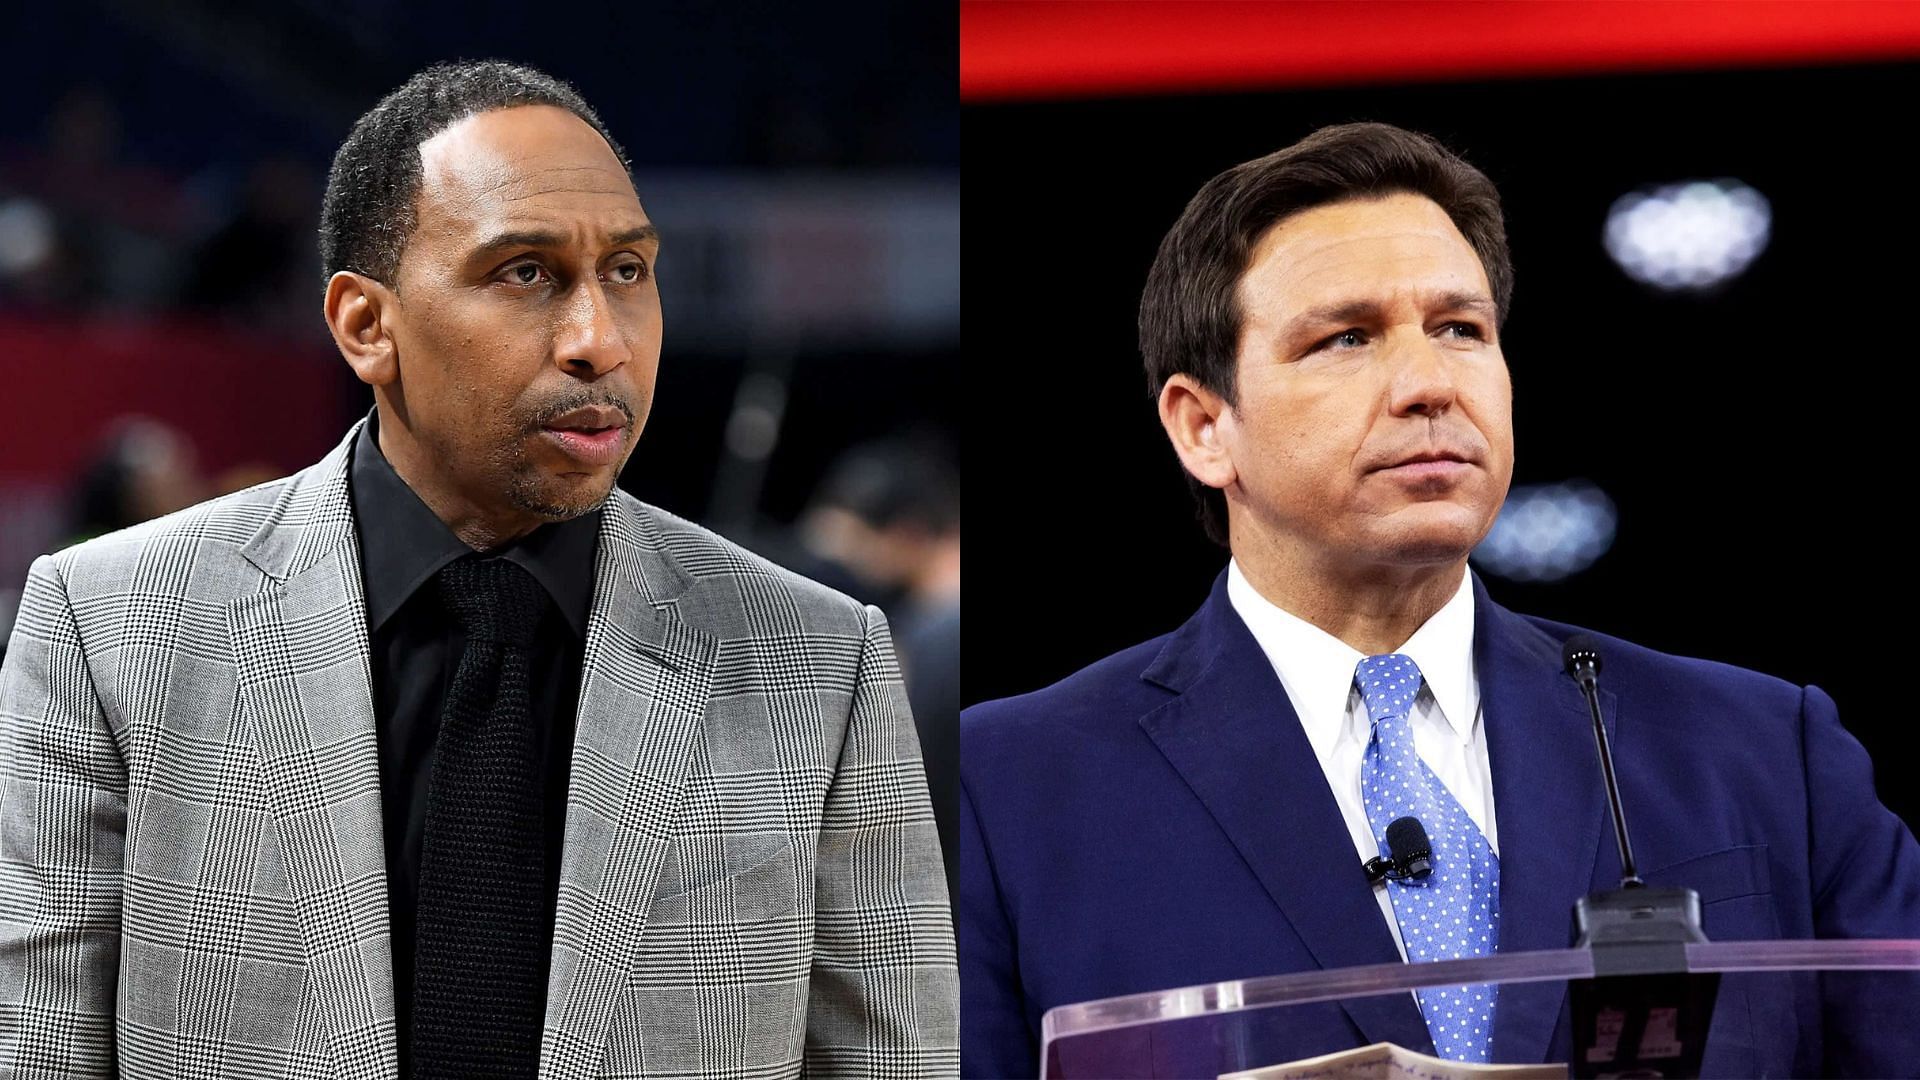 Stephen A Smith (L) goes off on Florida governor and presidential nominee Ron DeSantis (R)